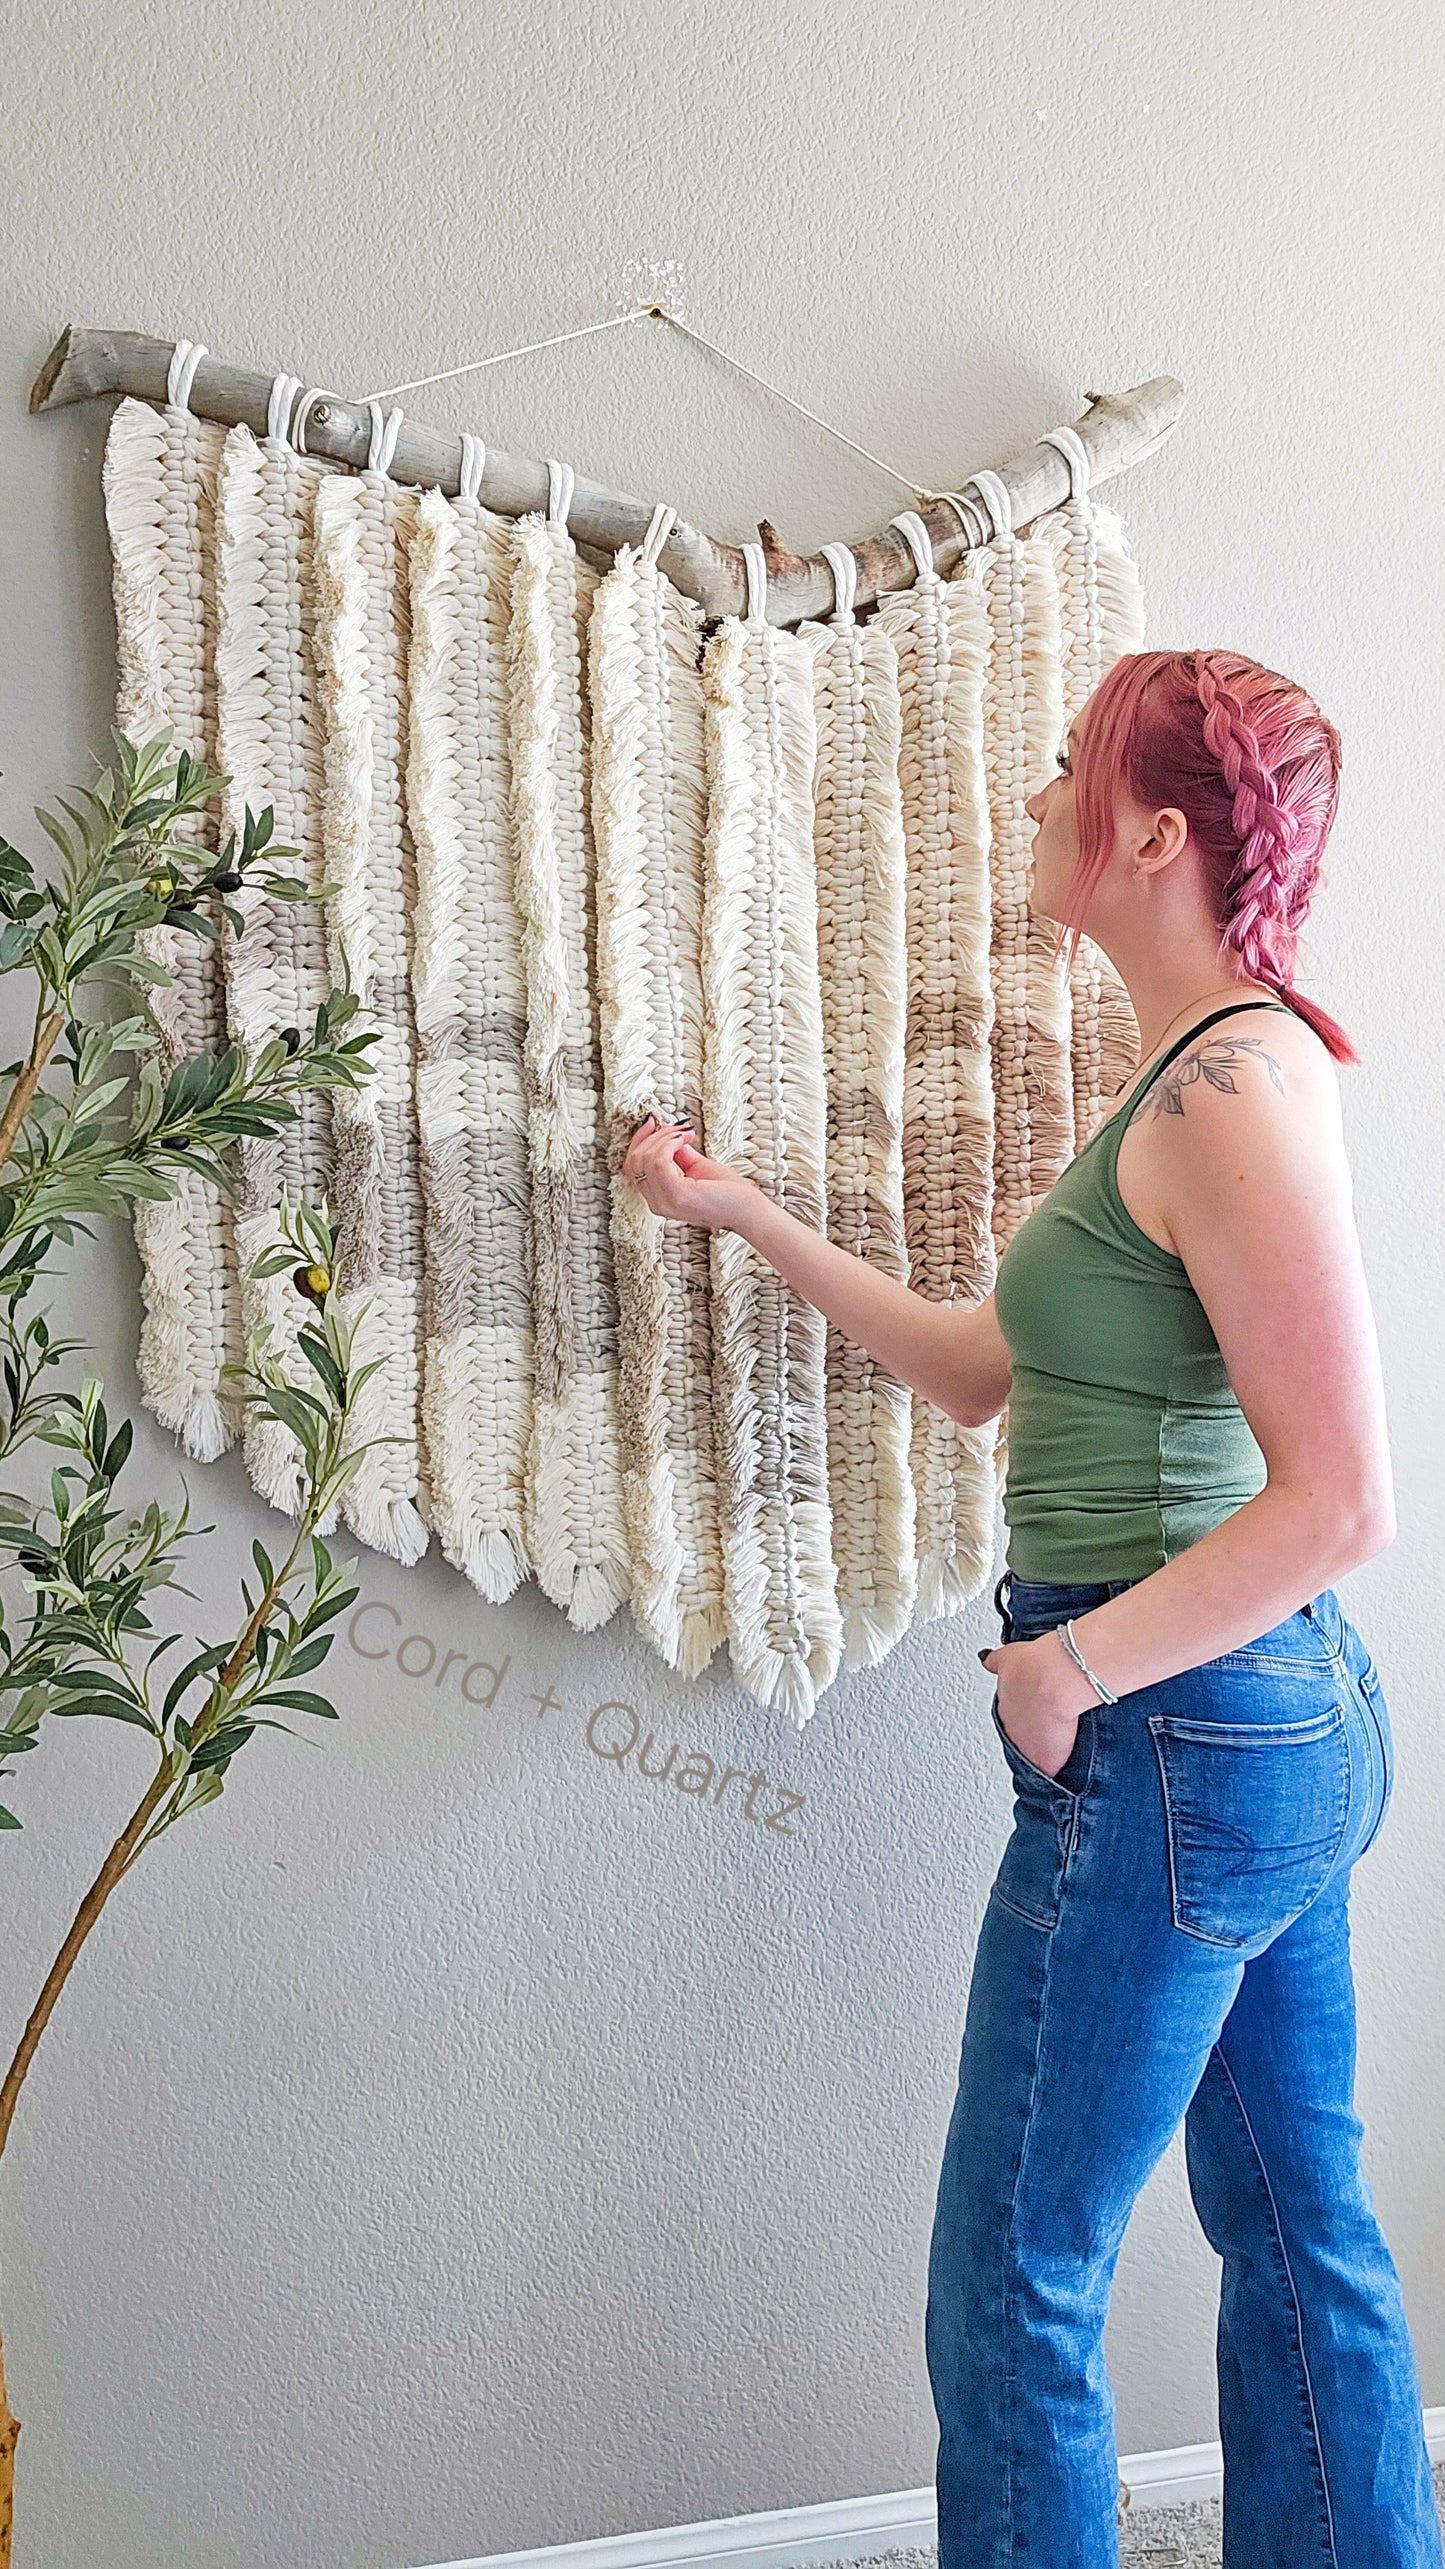 Largemacrame feather wall hanging. Unique one of a kind bohemian home decor. living room and bedroom wall art.